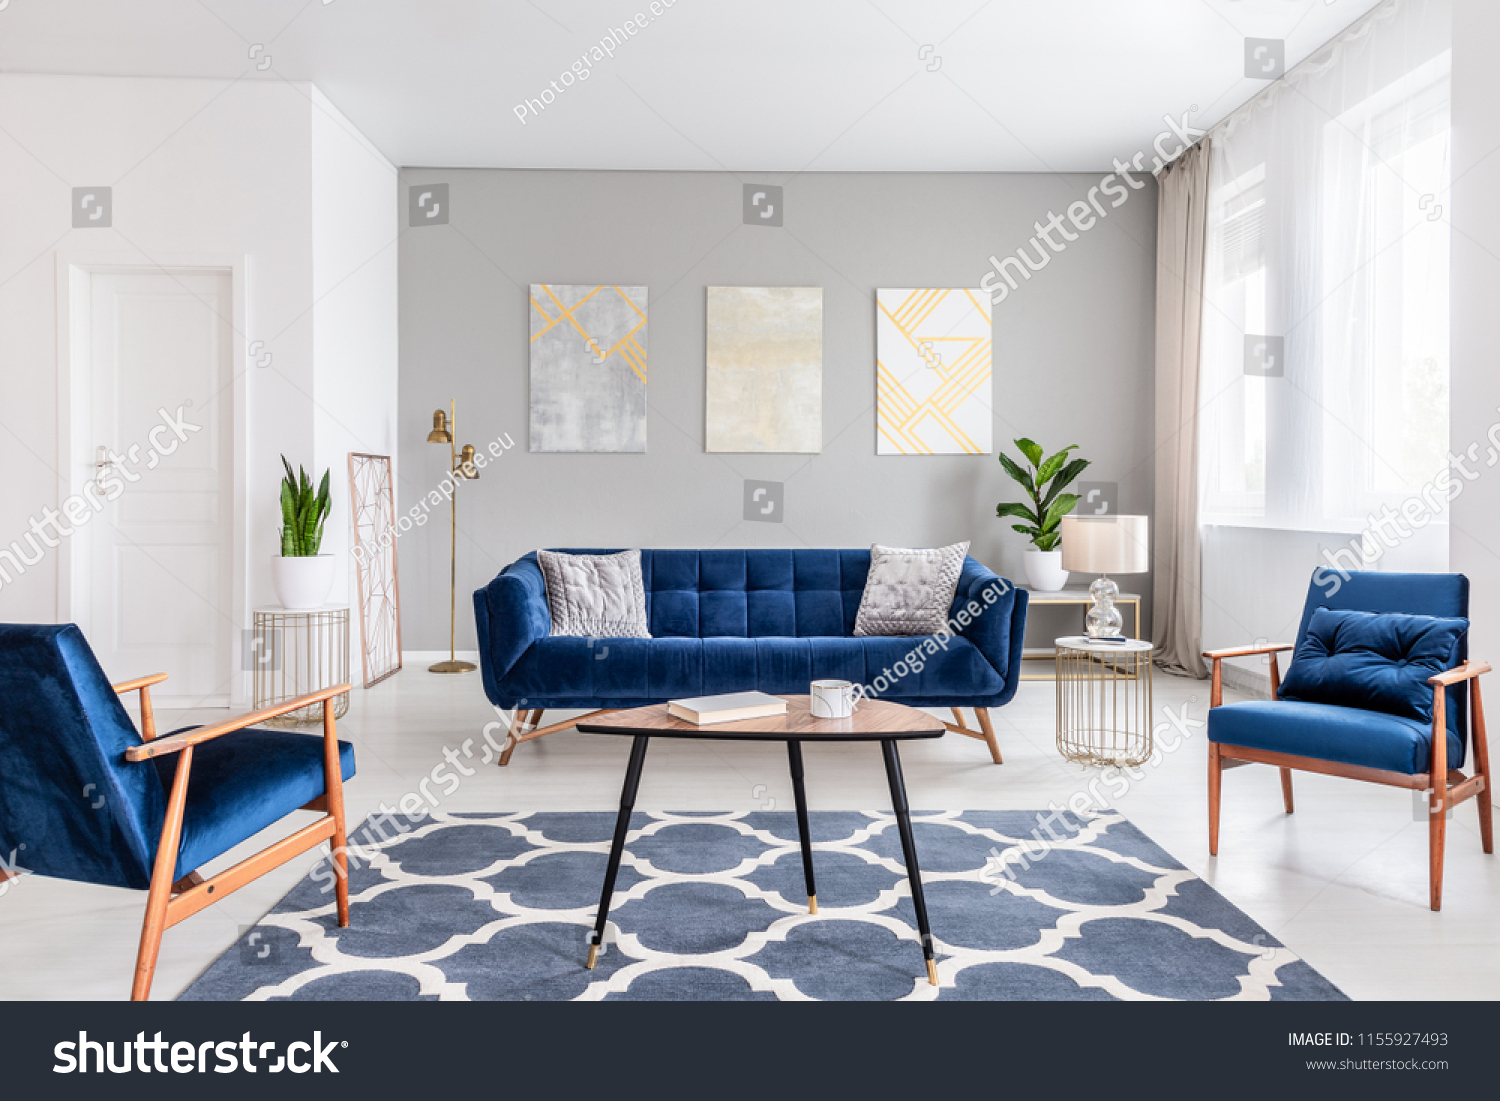 Real photo of a modern living room interior with a sofa, armchairs, table, paintings and patterned carpet #1155927493